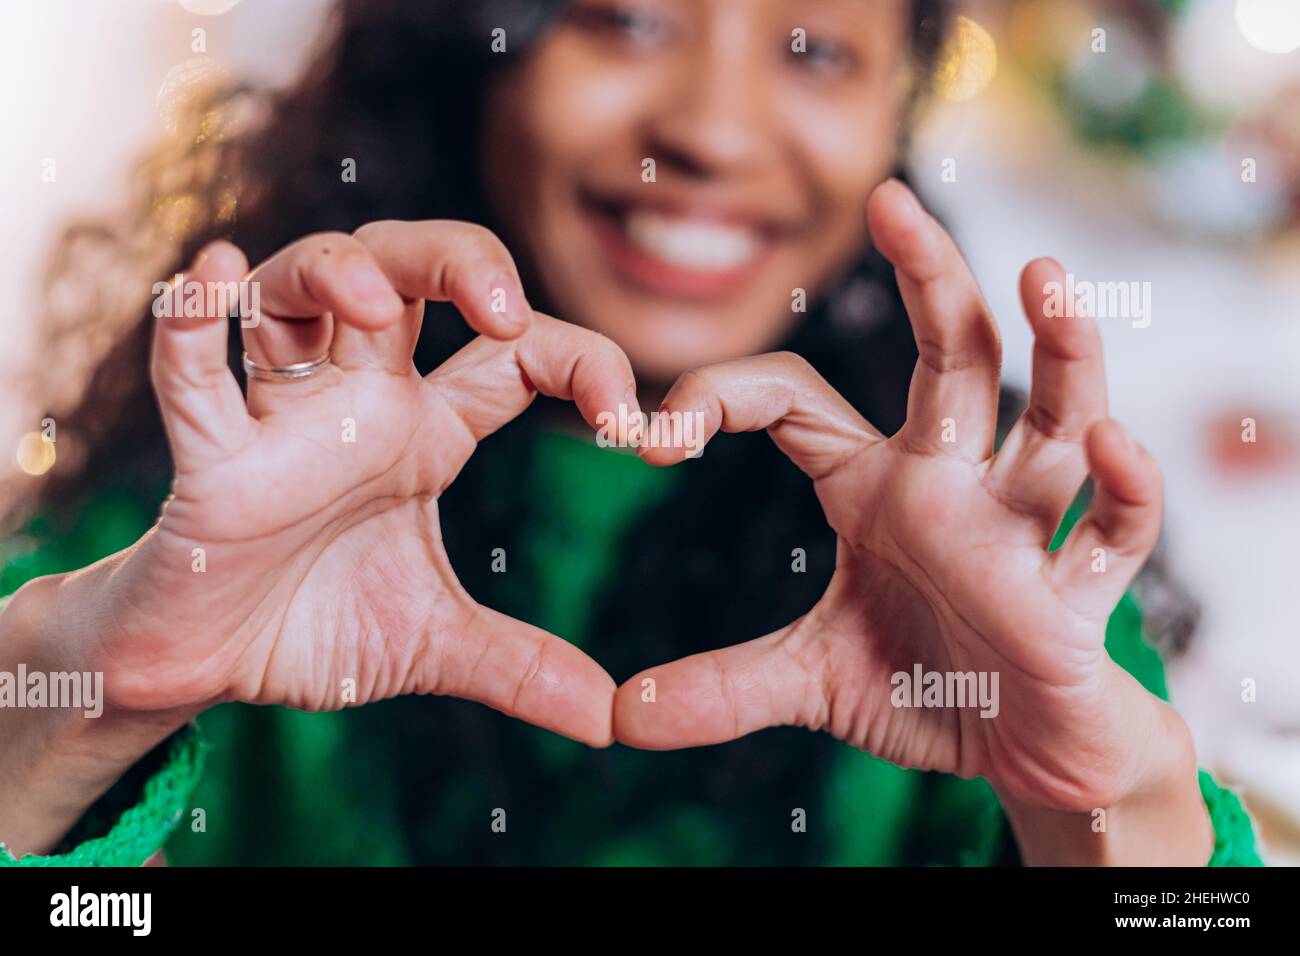 Brunette long-haired daughter and African American mother sit and pose showing hearts with fingers against Christmas decorations Stock Photo